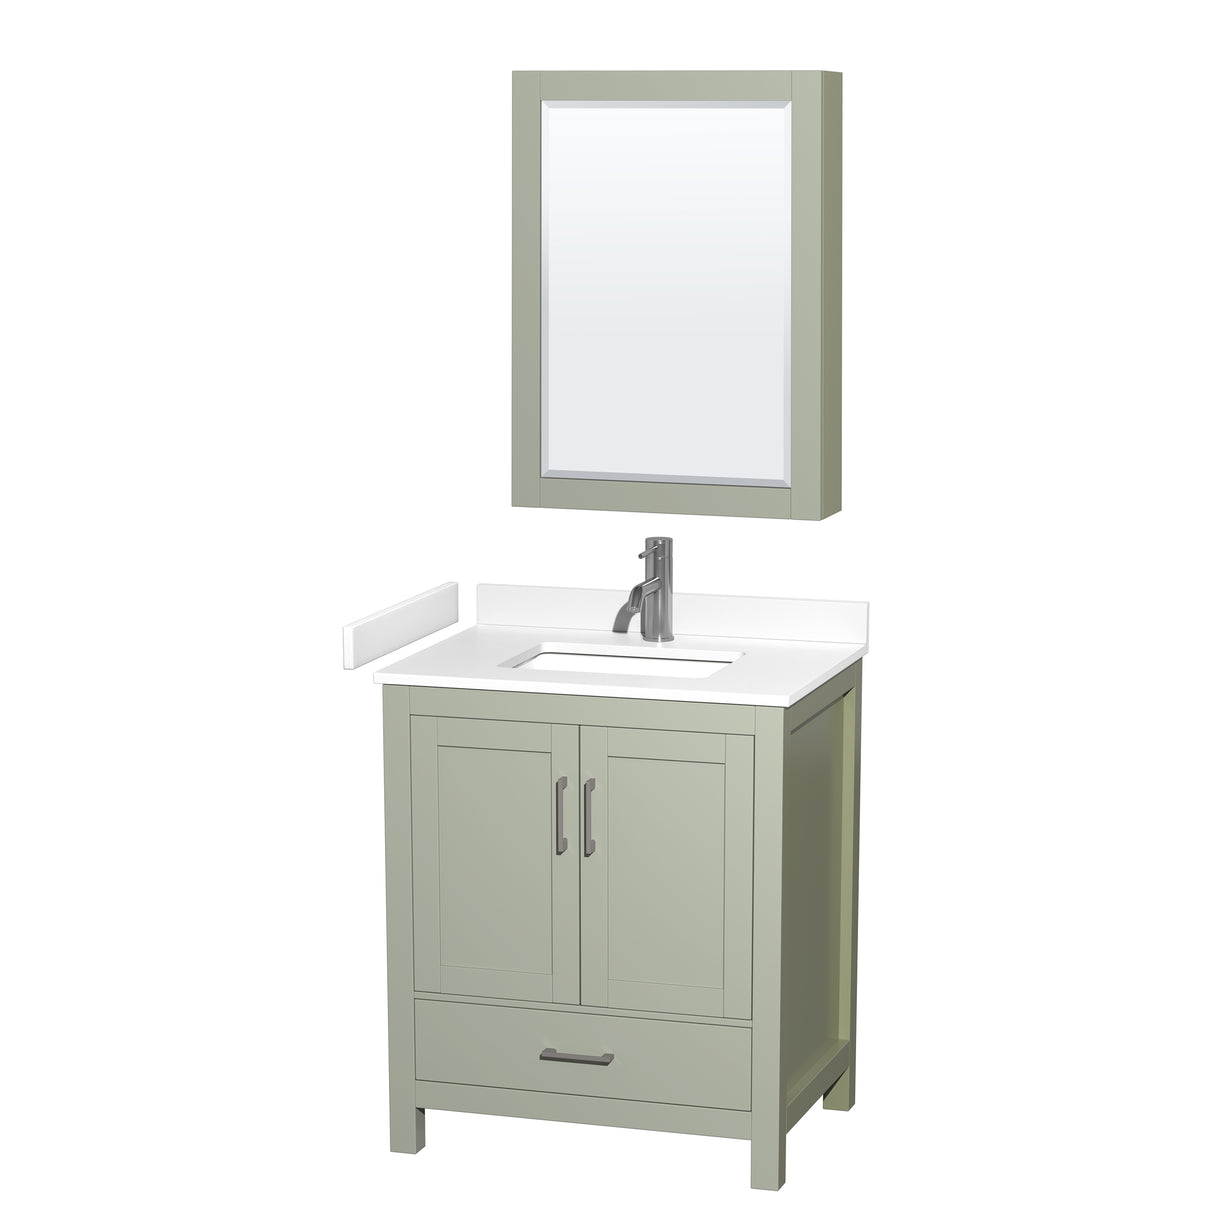 Sheffield 30 inch Single Bathroom Vanity in Light Green White Cultured Marble Countertop Undermount Square Sink Brushed Nickel Trim Medicine Cabinet